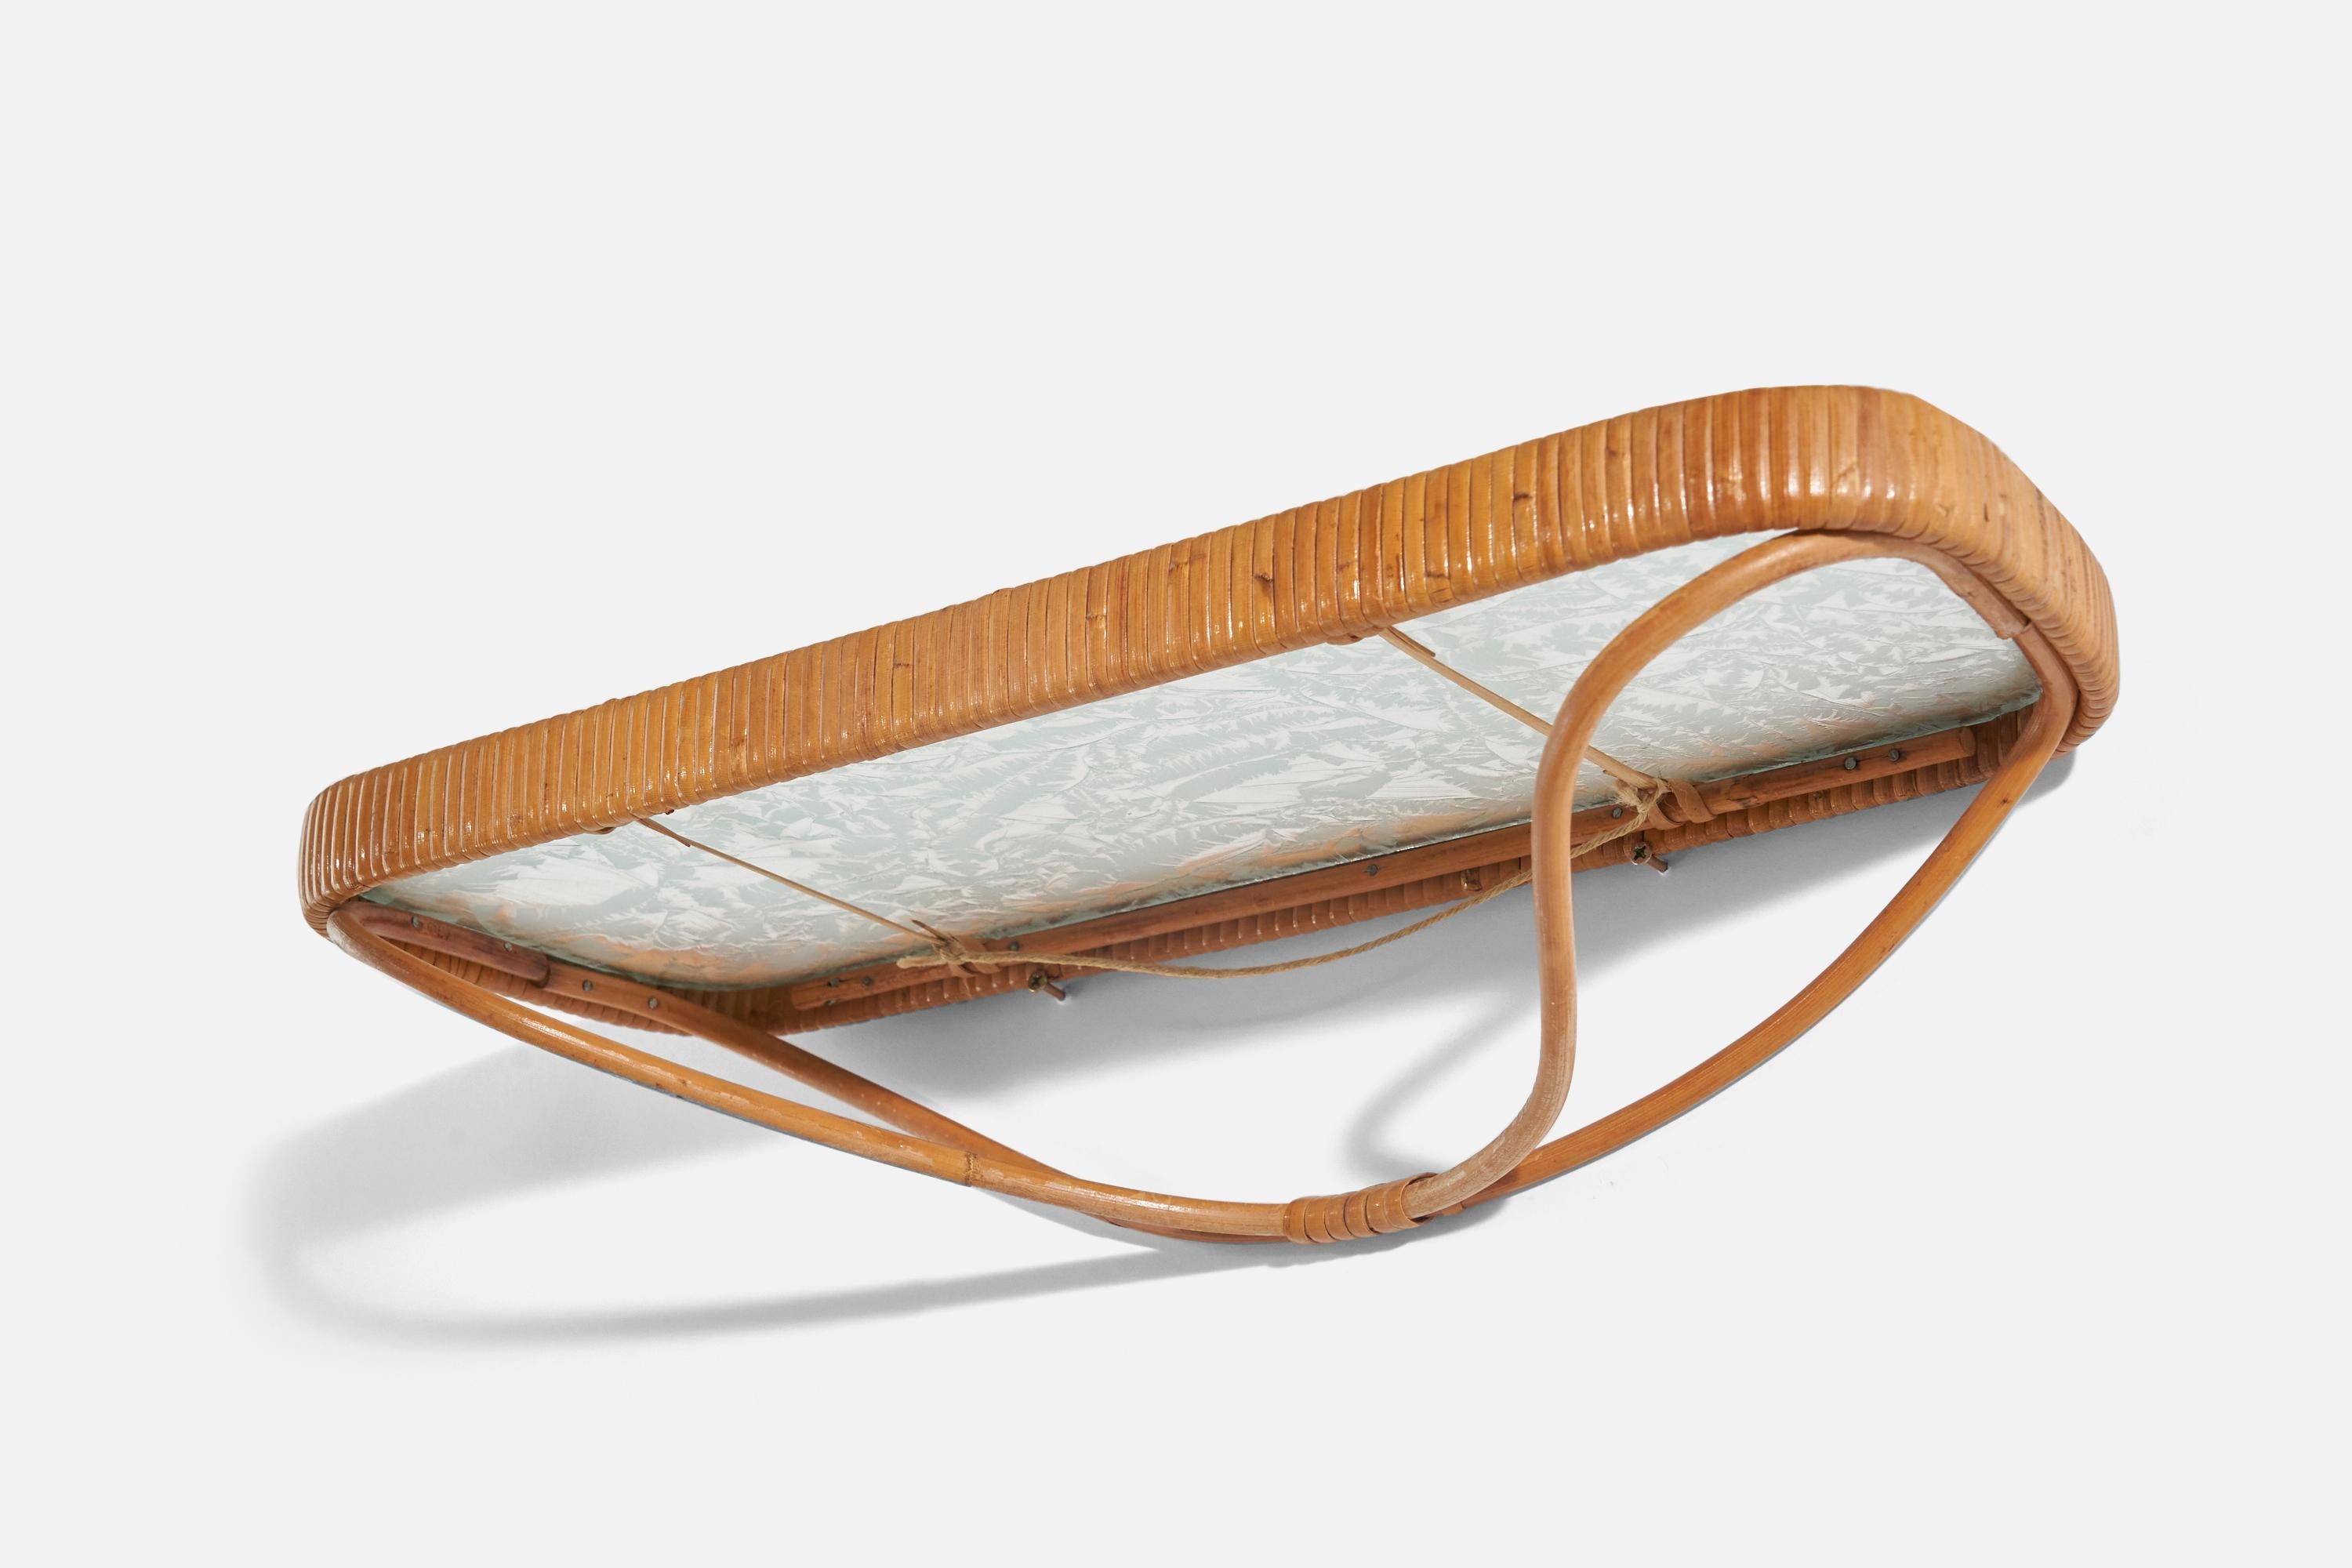 A rattan, bamboo and glass console or wall shelf designed and produced in Finland, 1950s.